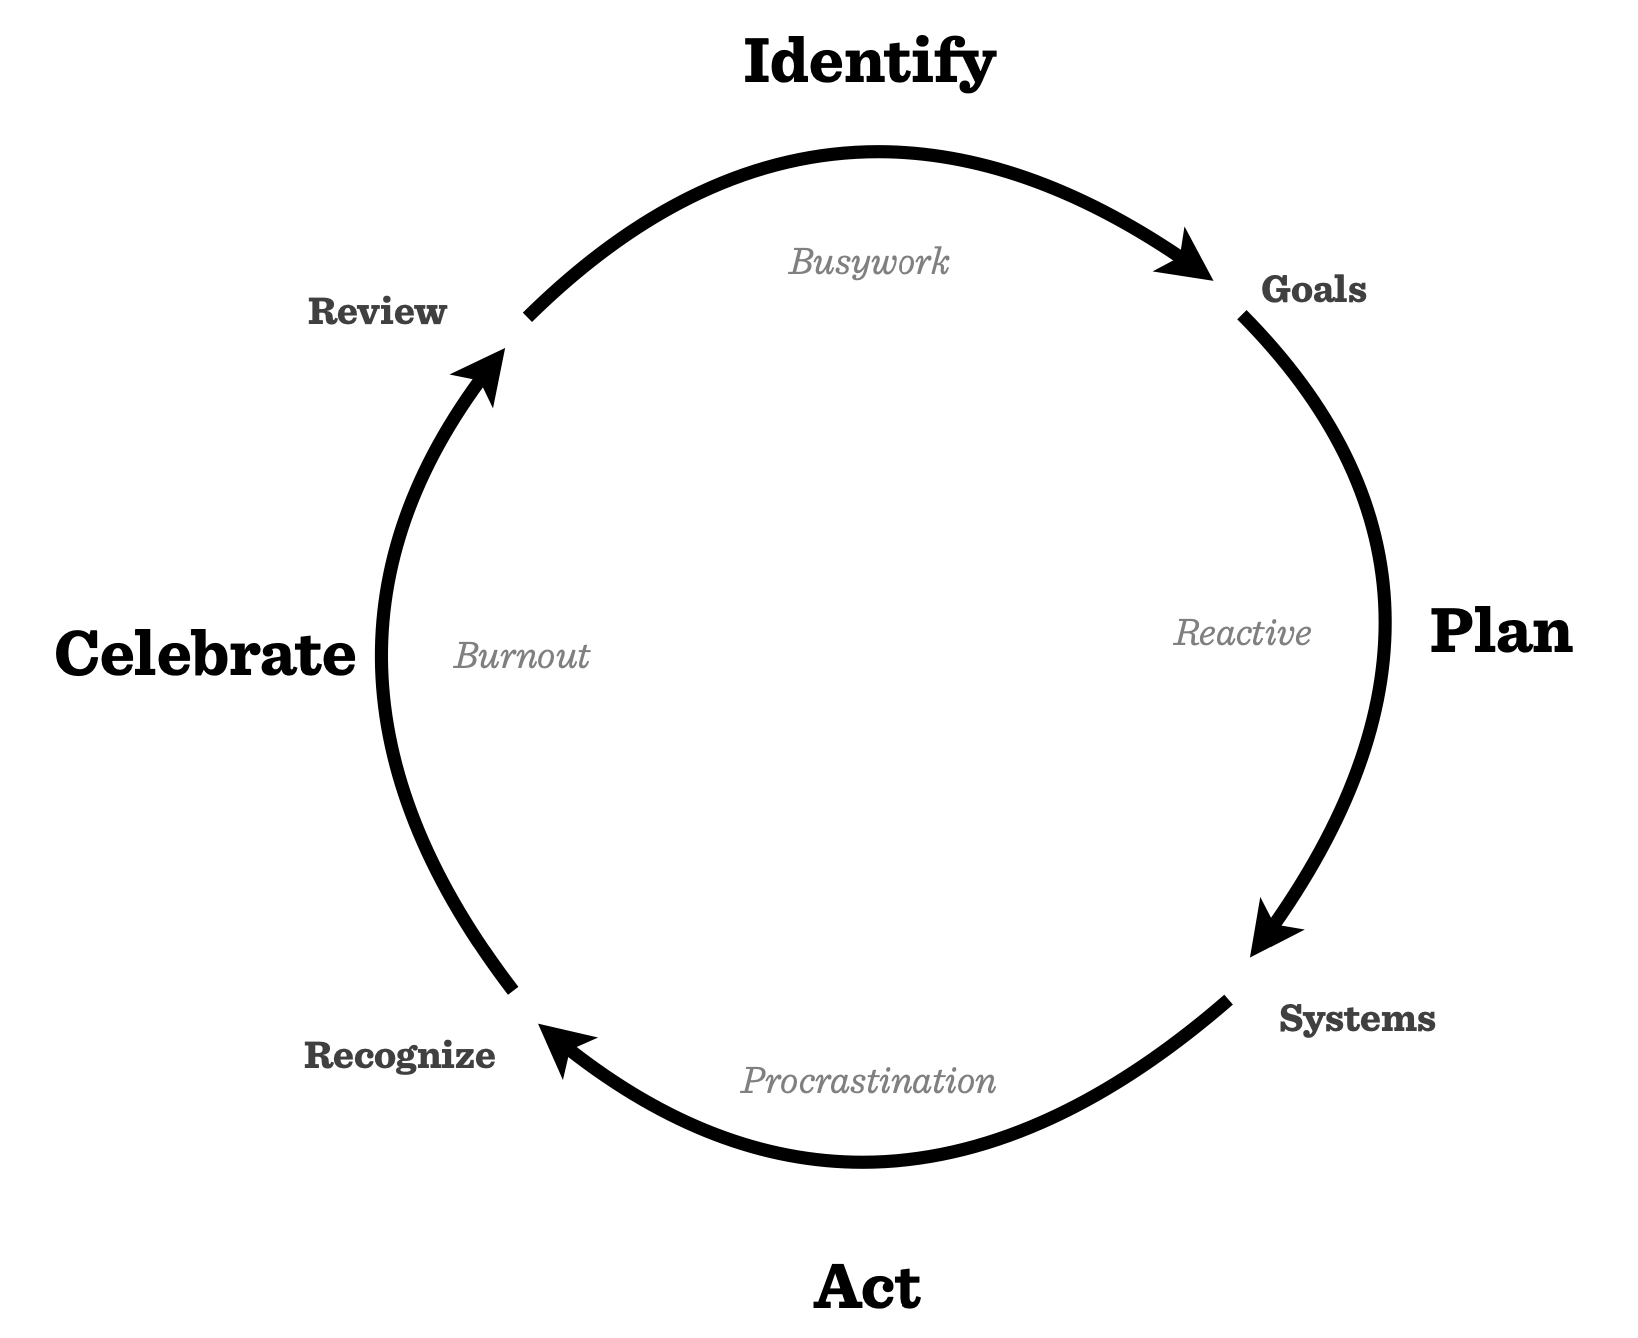 Flywheel of Pructivity outlining the steps of Identify, Plan, Act and Celebrate as well as it's inverse - Busywork, Reactive, Procrastination and Burnout